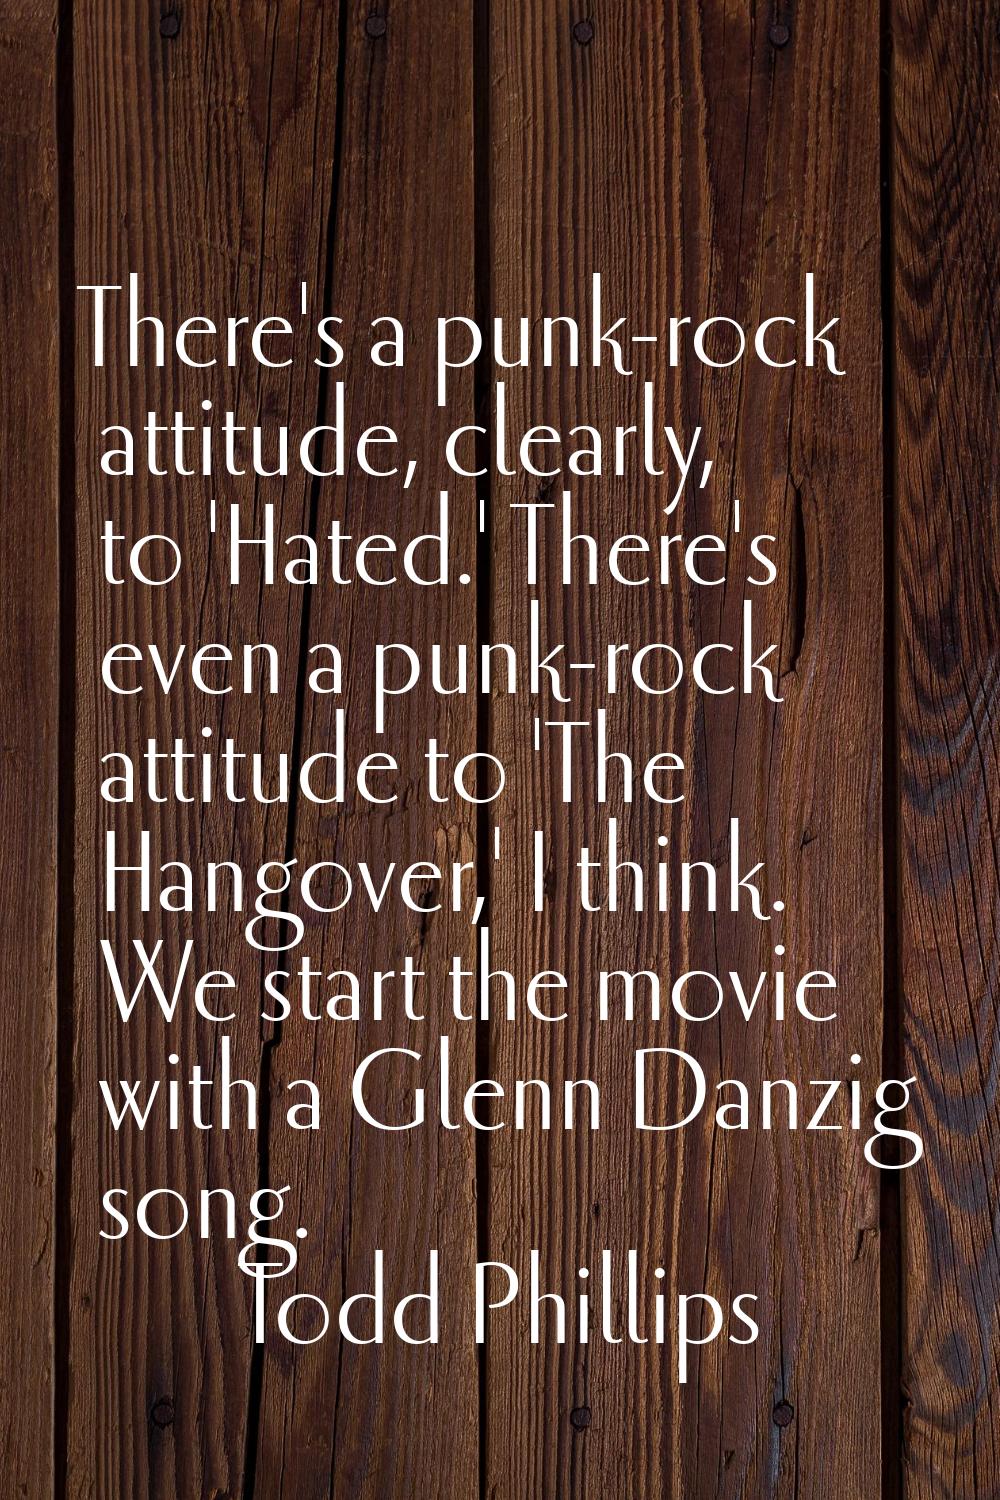 There's a punk-rock attitude, clearly, to 'Hated.' There's even a punk-rock attitude to 'The Hangov